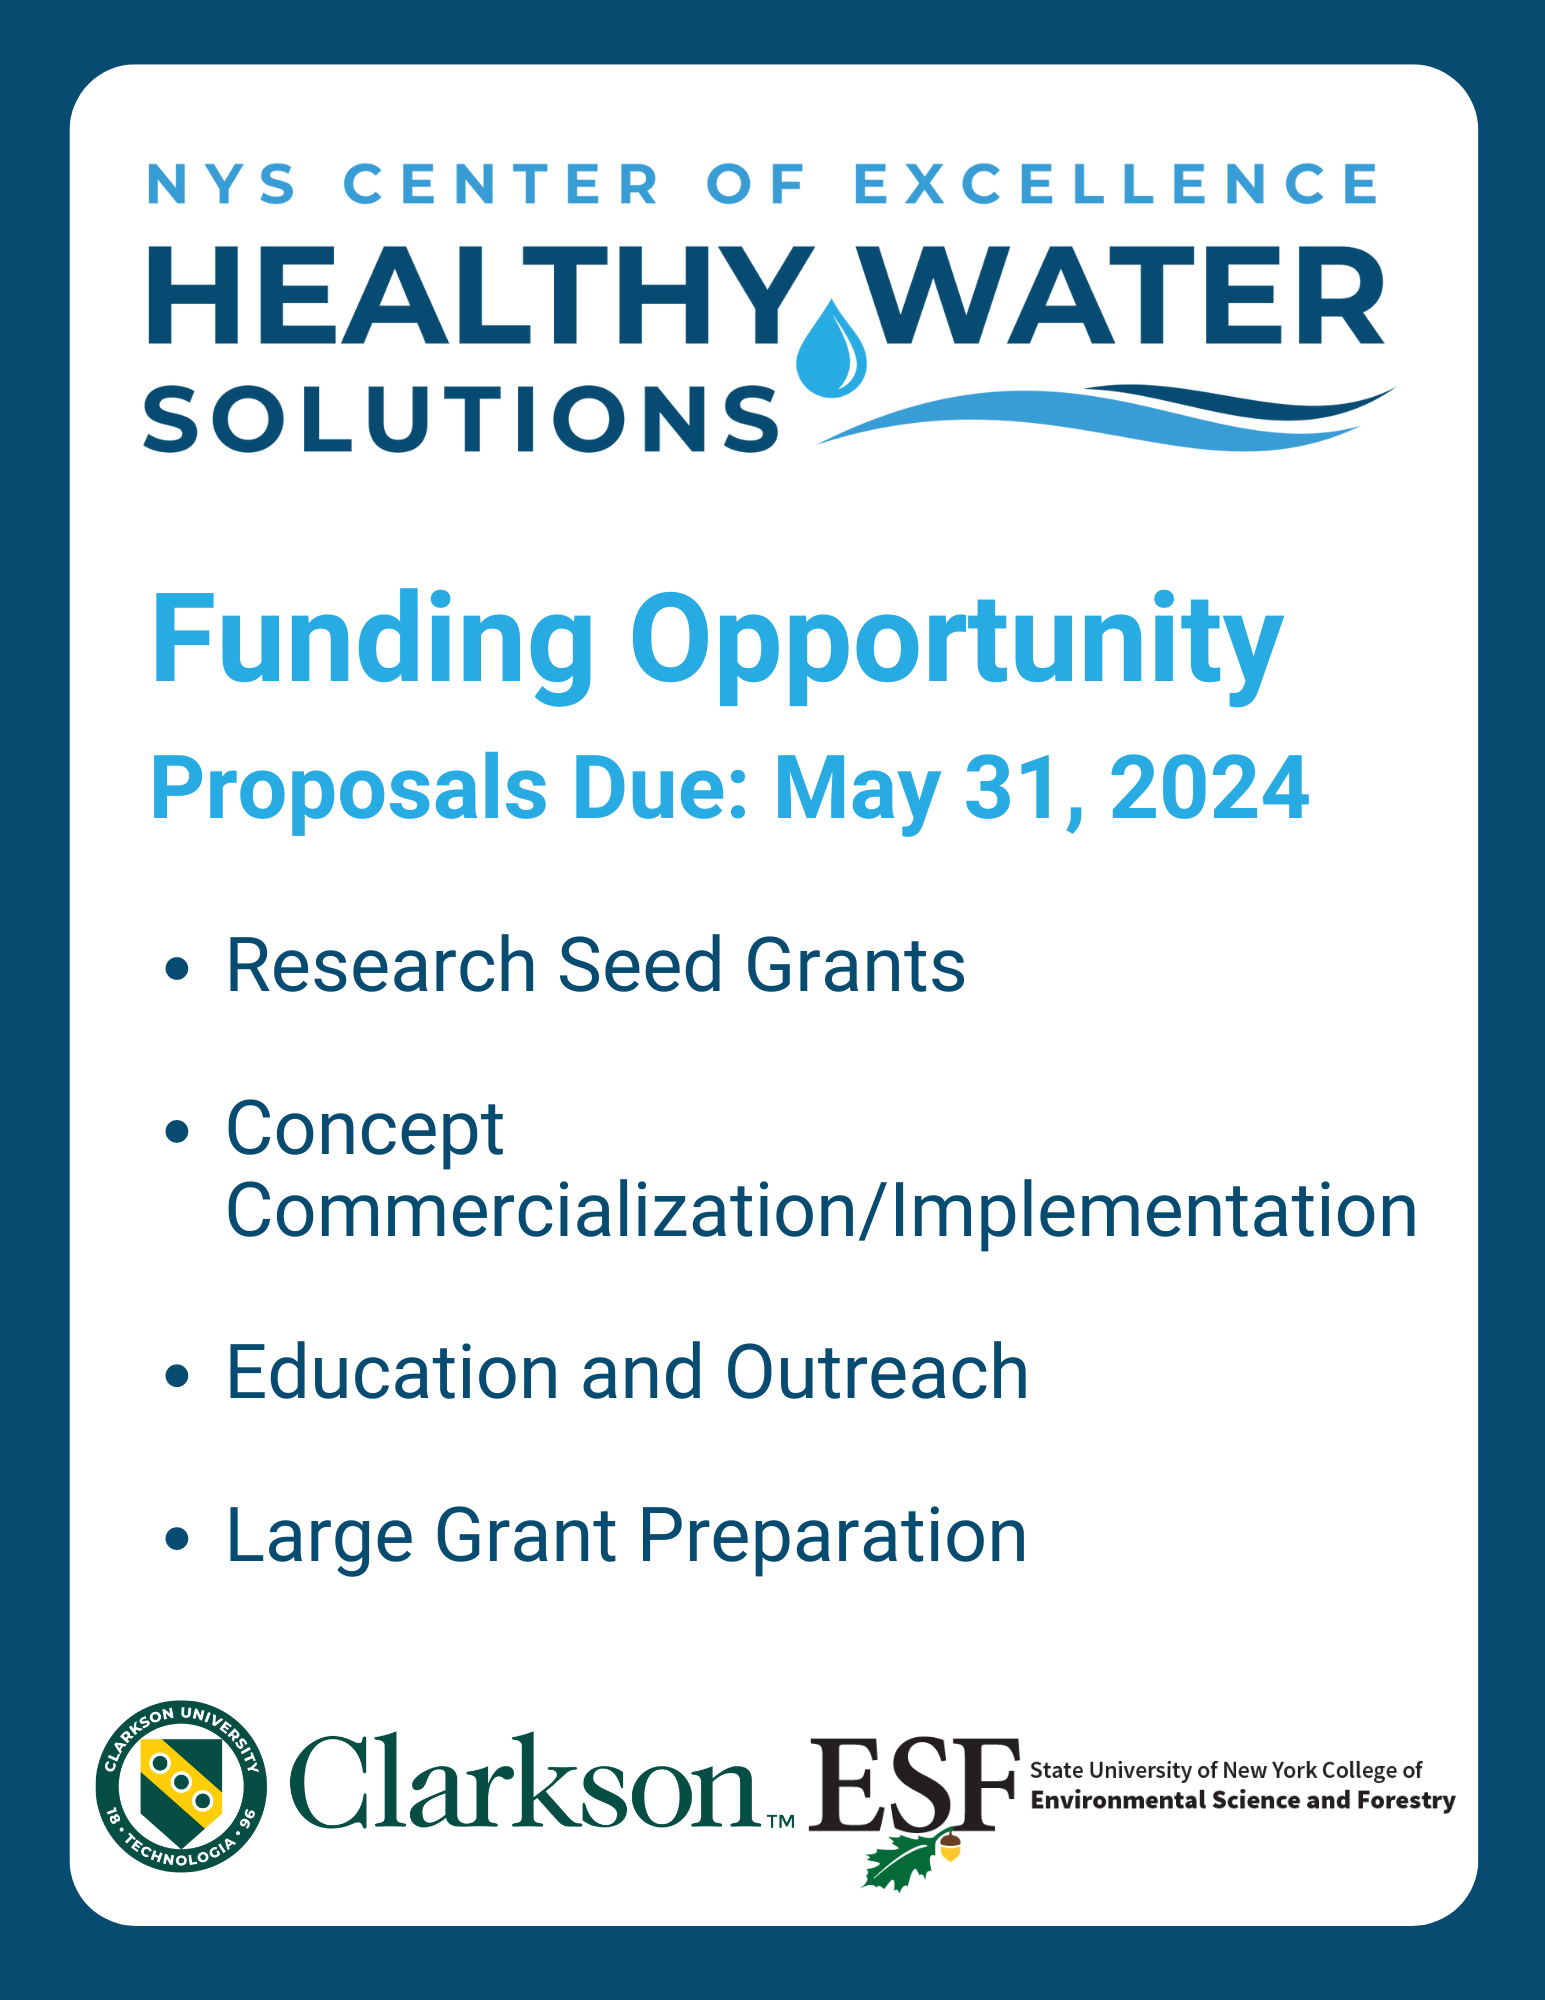 Funding Opportunity through Clarkson/ESF NYS Center of Excellence in Healthy Water Solutions